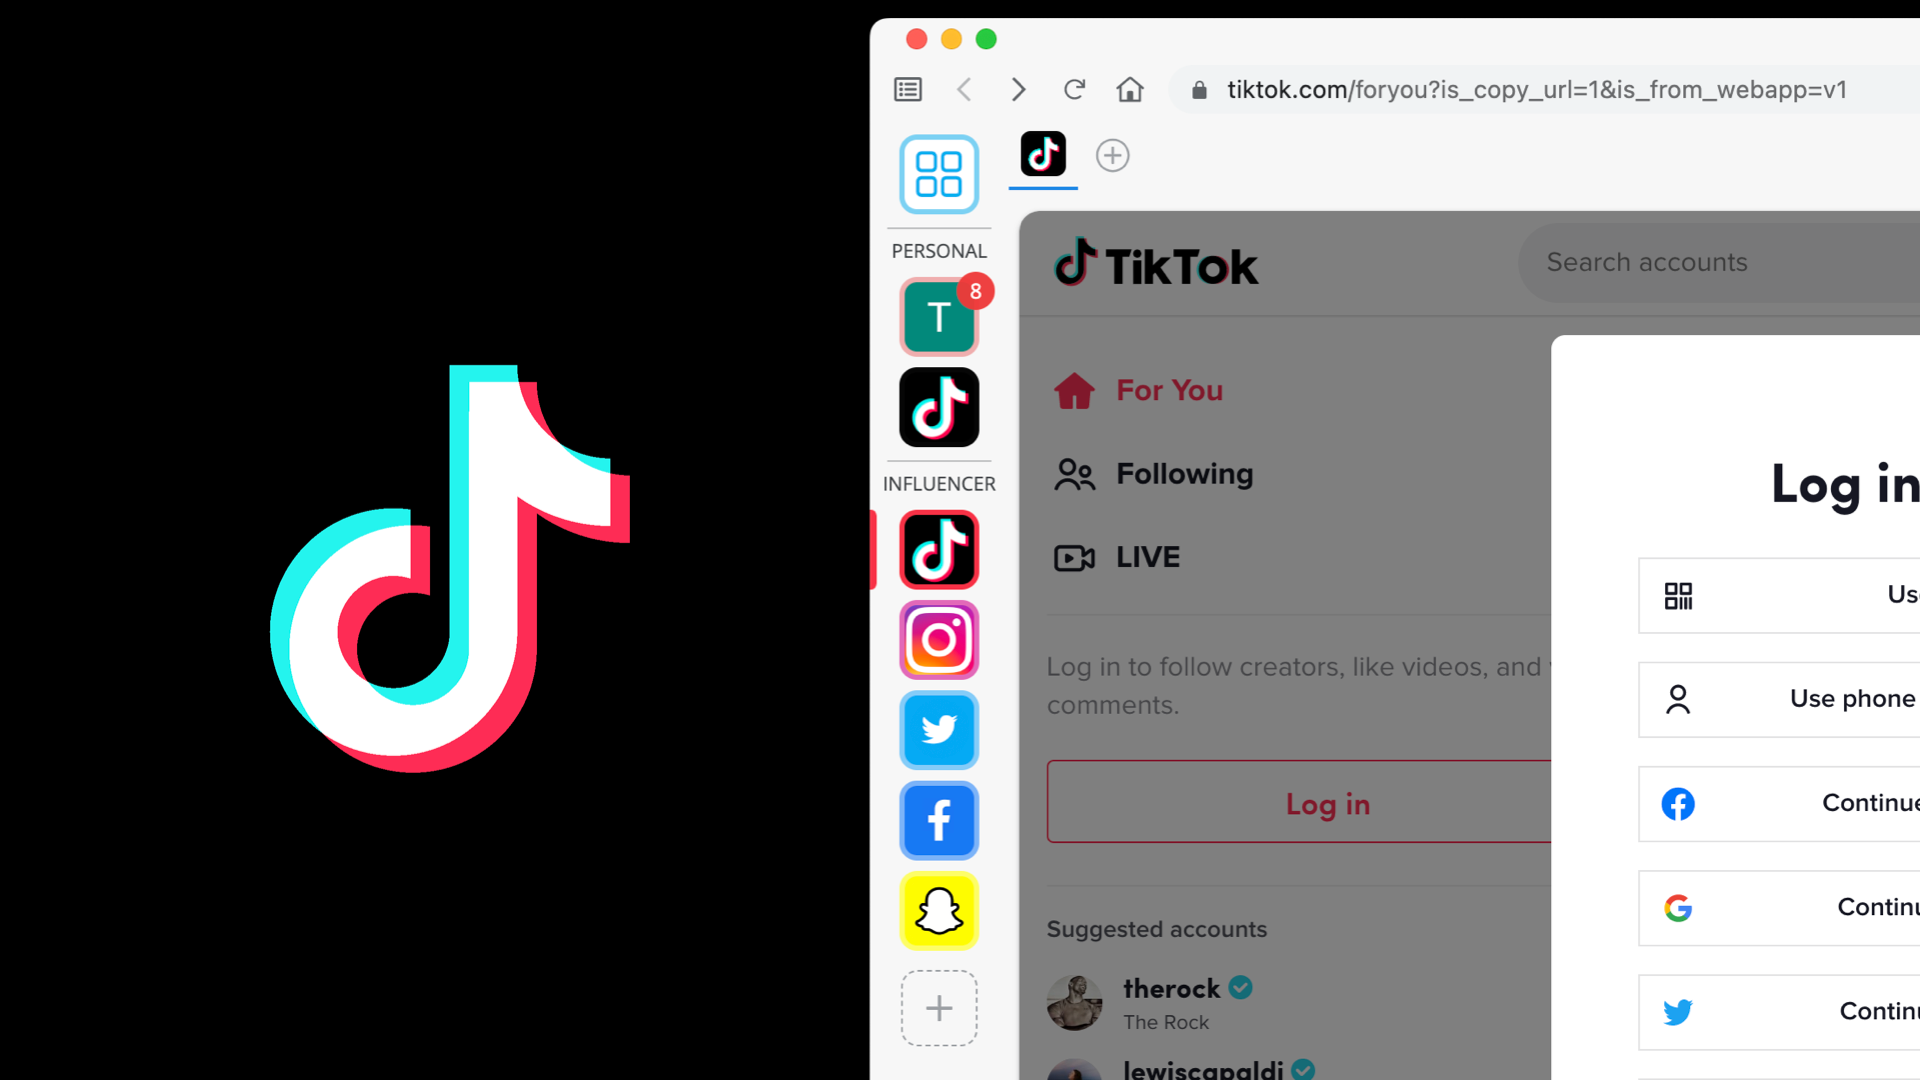 how to launch multiple roblox accounts｜TikTok Search